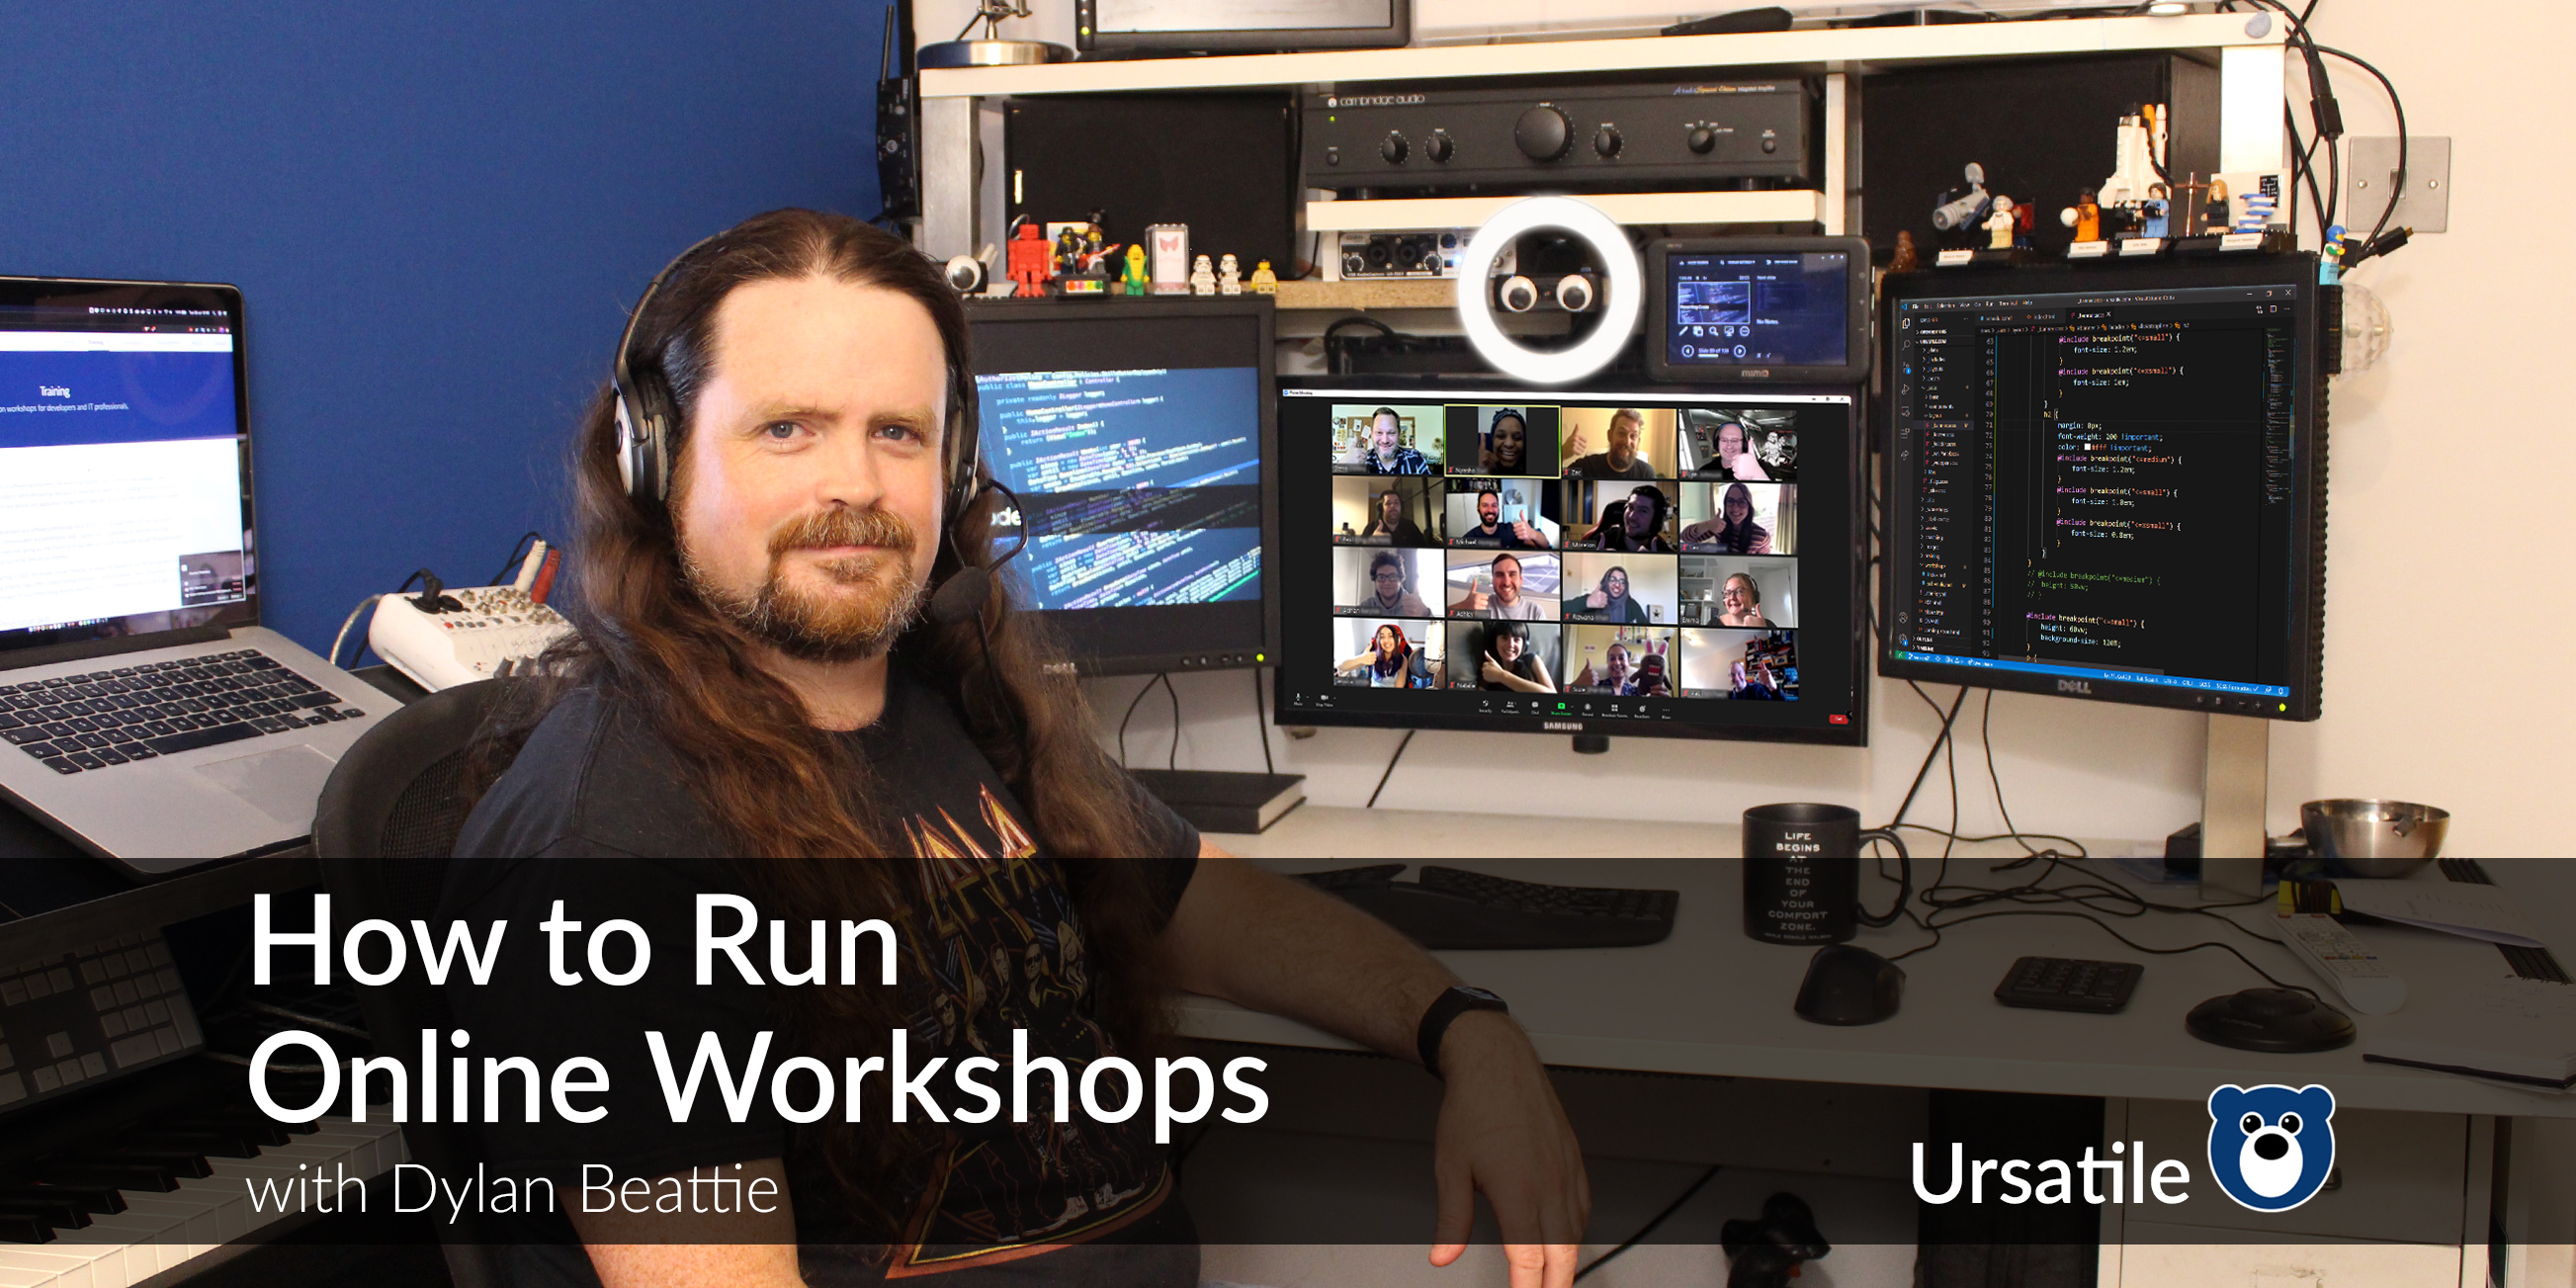 Dylan Beattie sitting at a computer, behind a banner promoting How To Run Online Workshops